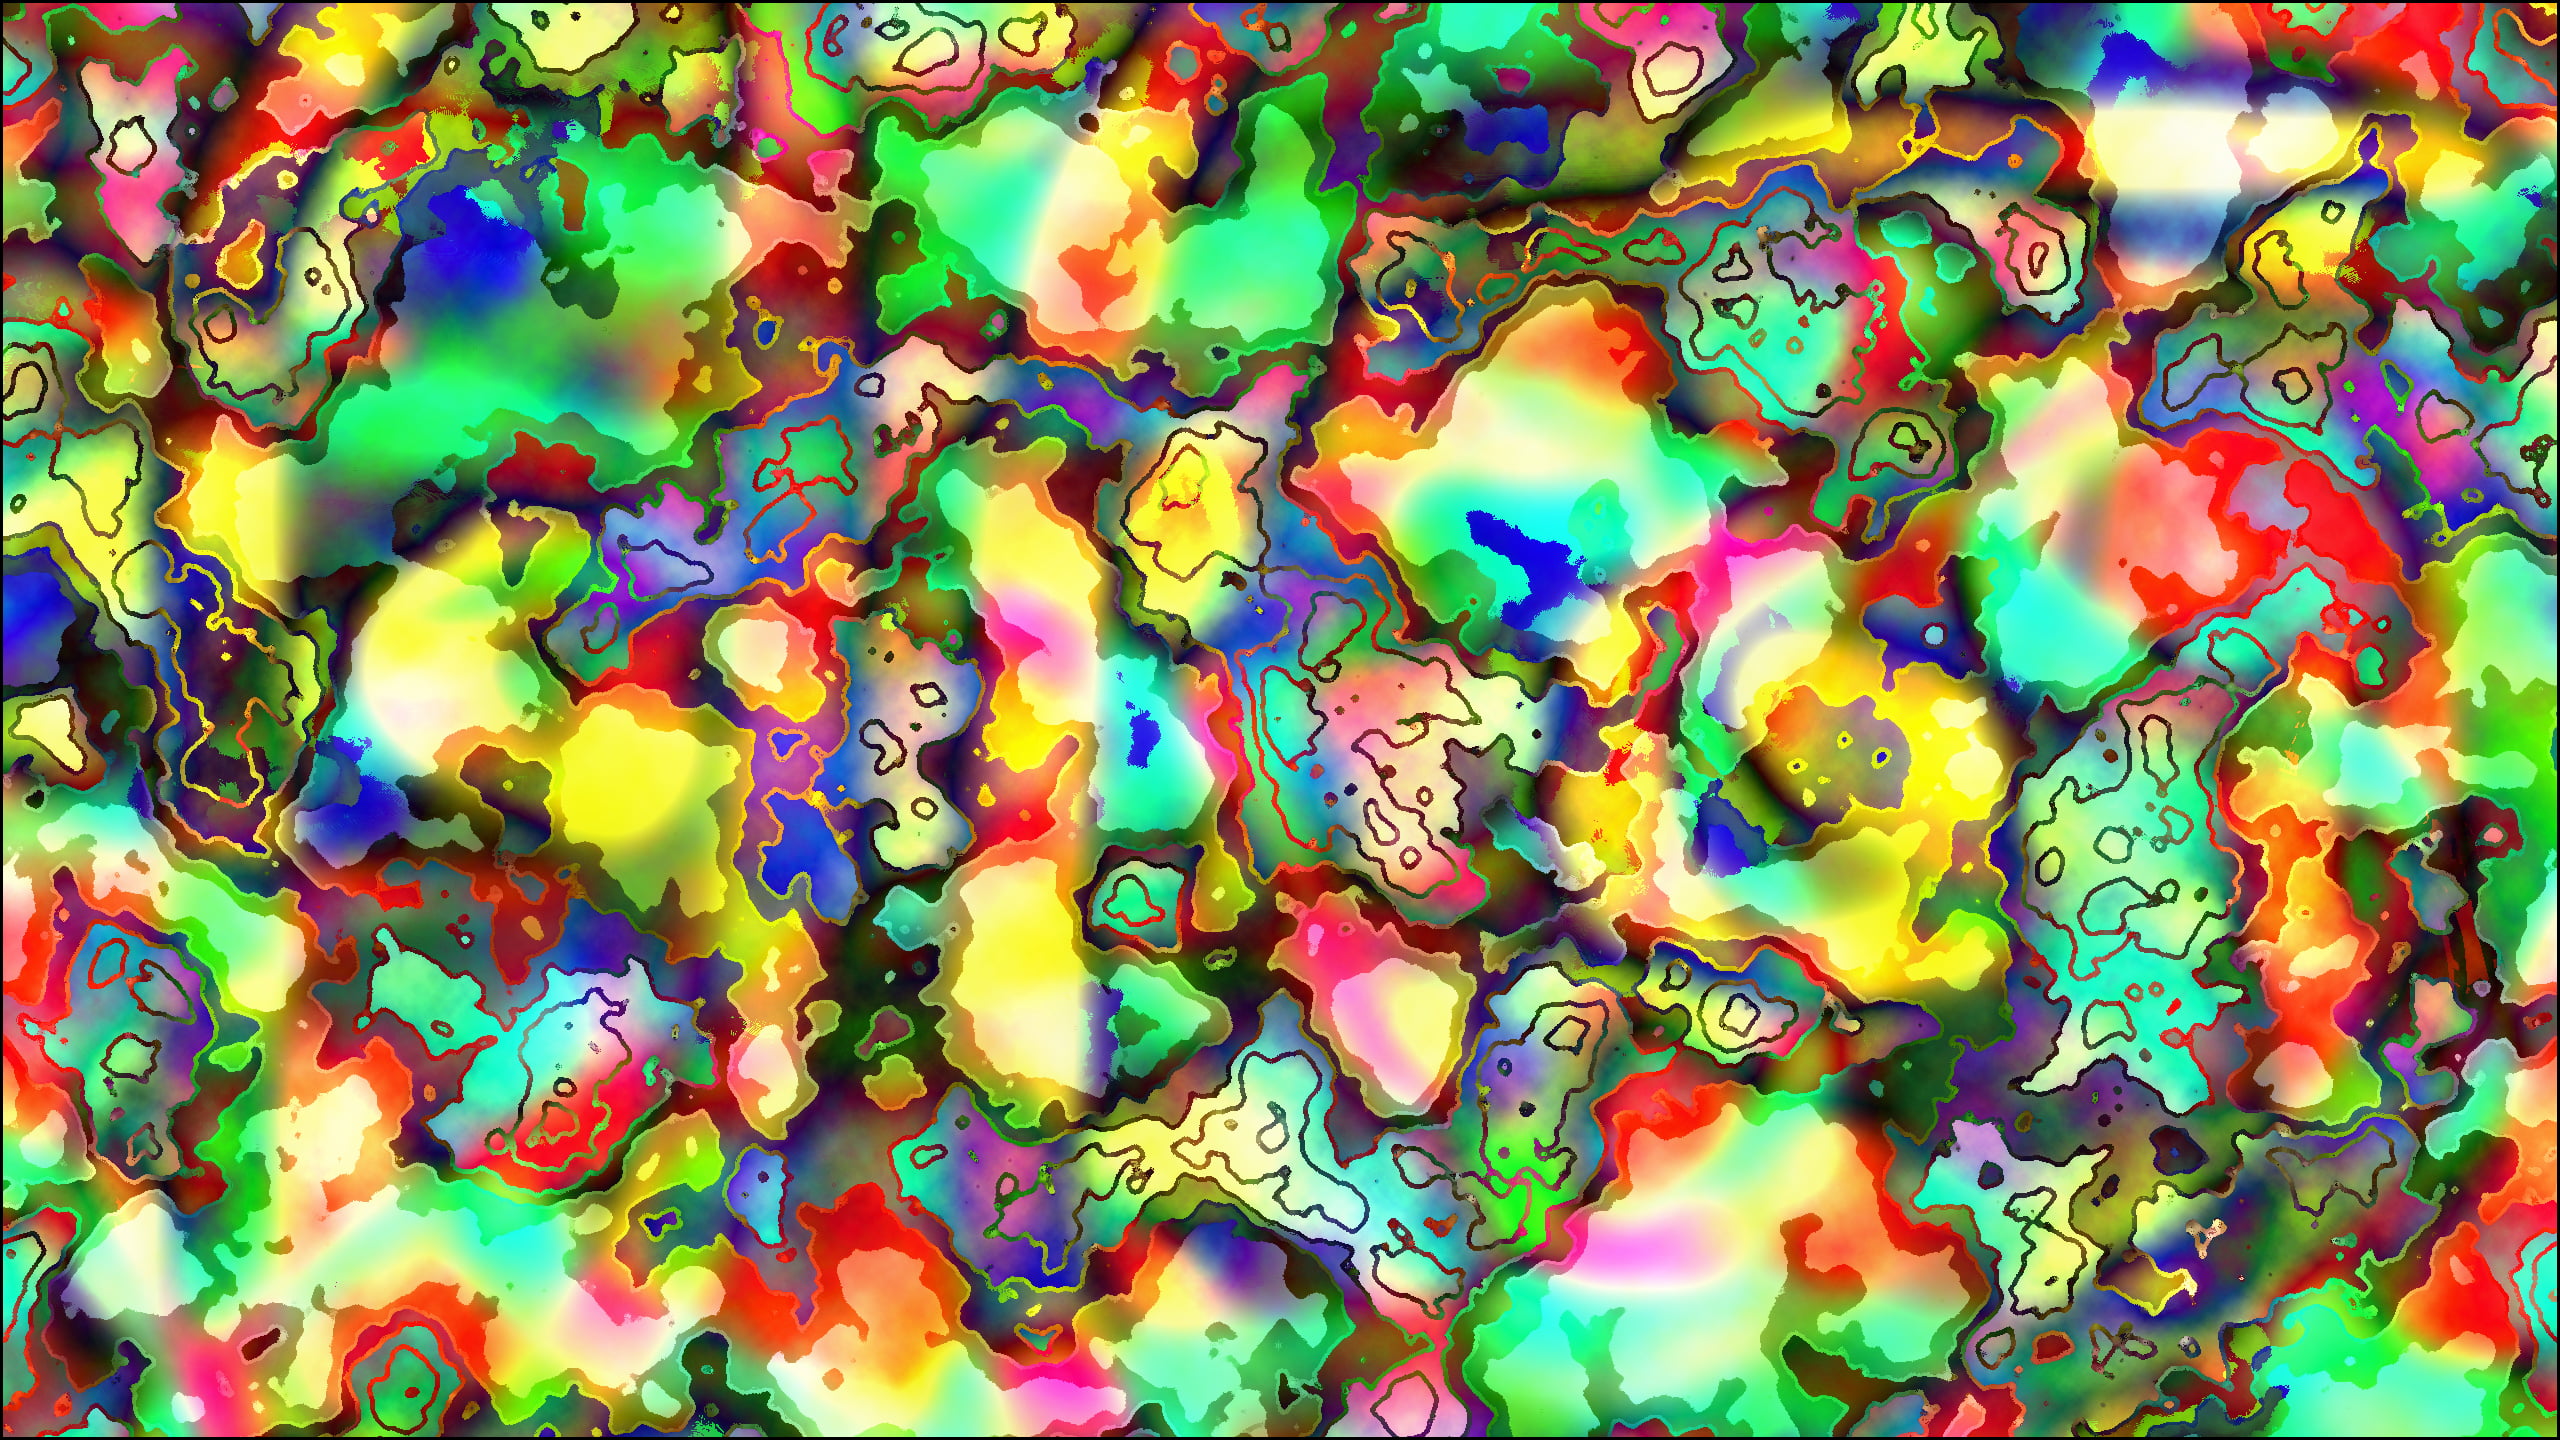 multicolored abstract illustration, abstract, trippy, bright, LSD